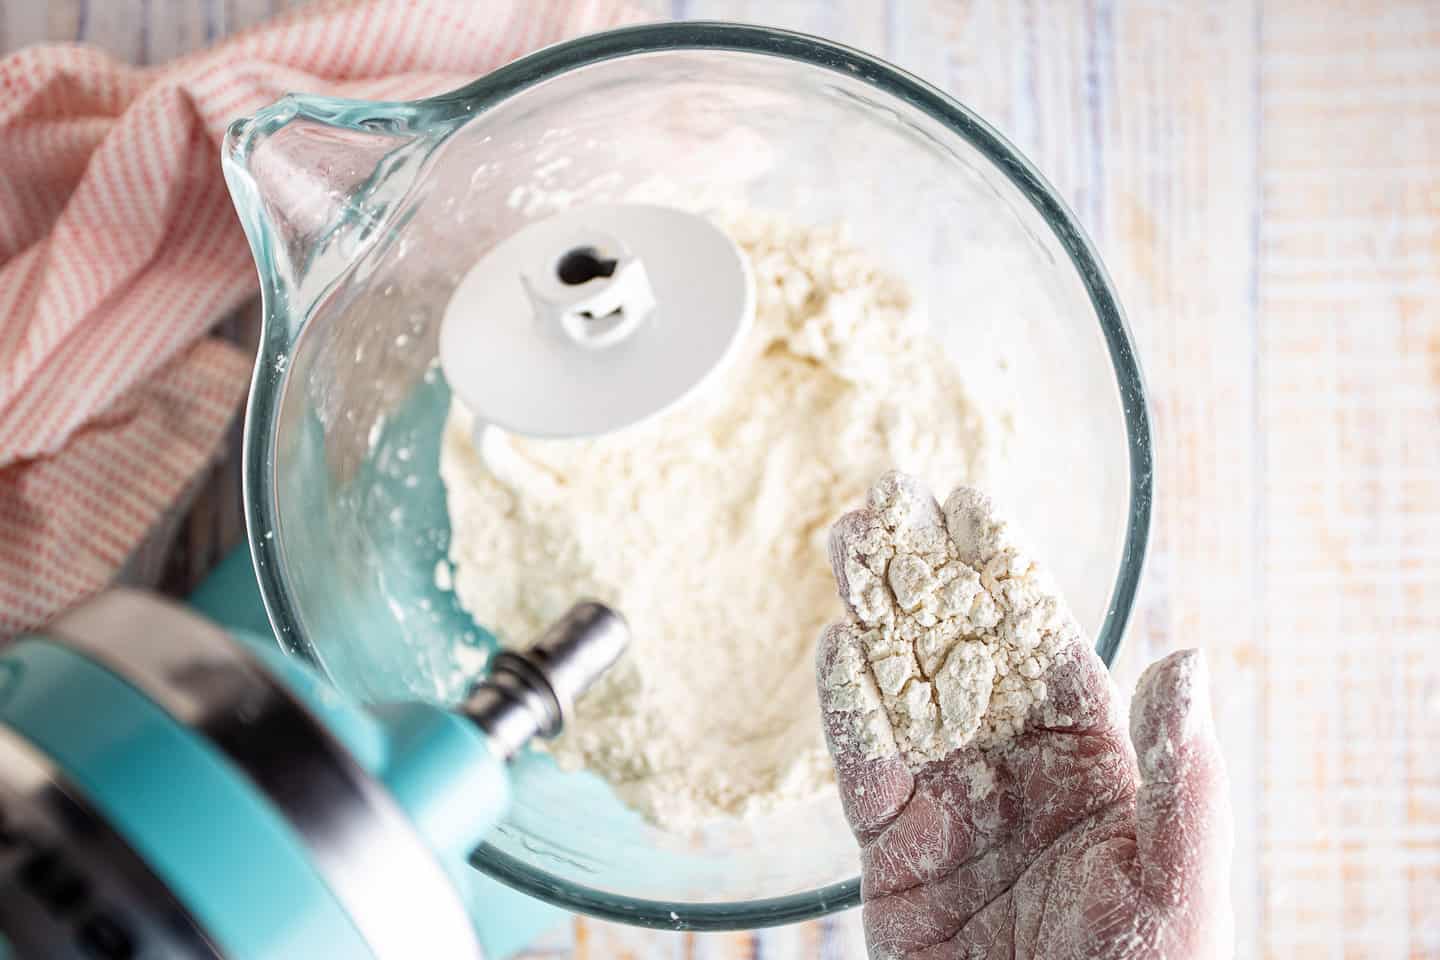 Blending dry ingredients with butter until it resembles coarse crumbs.